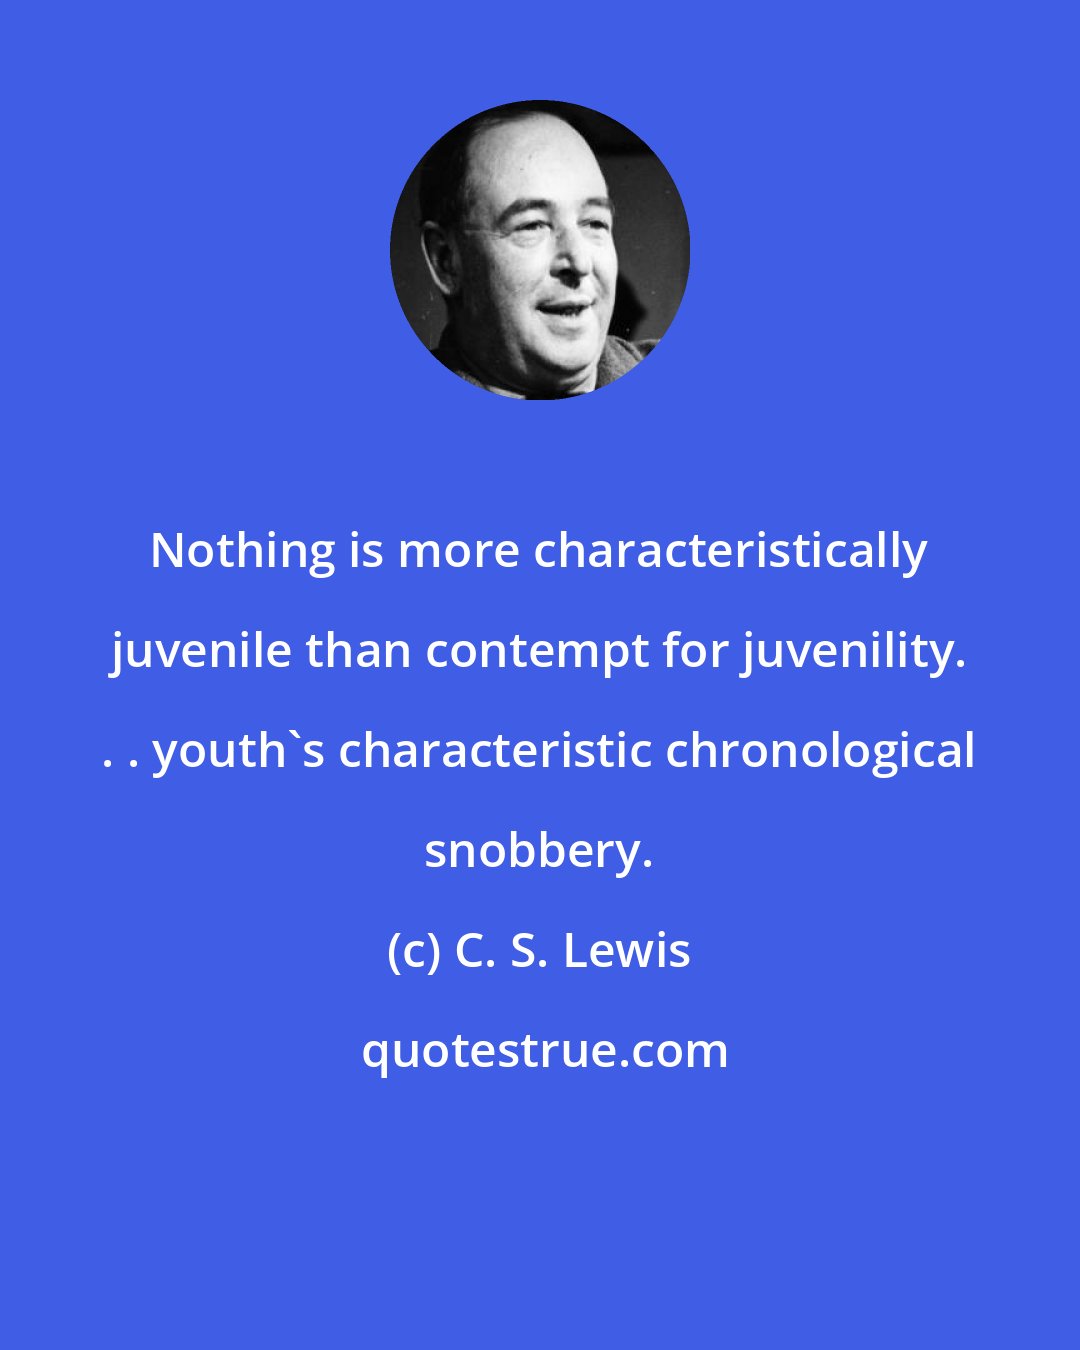 C. S. Lewis: Nothing is more characteristically juvenile than contempt for juvenility. . . youth's characteristic chronological snobbery.